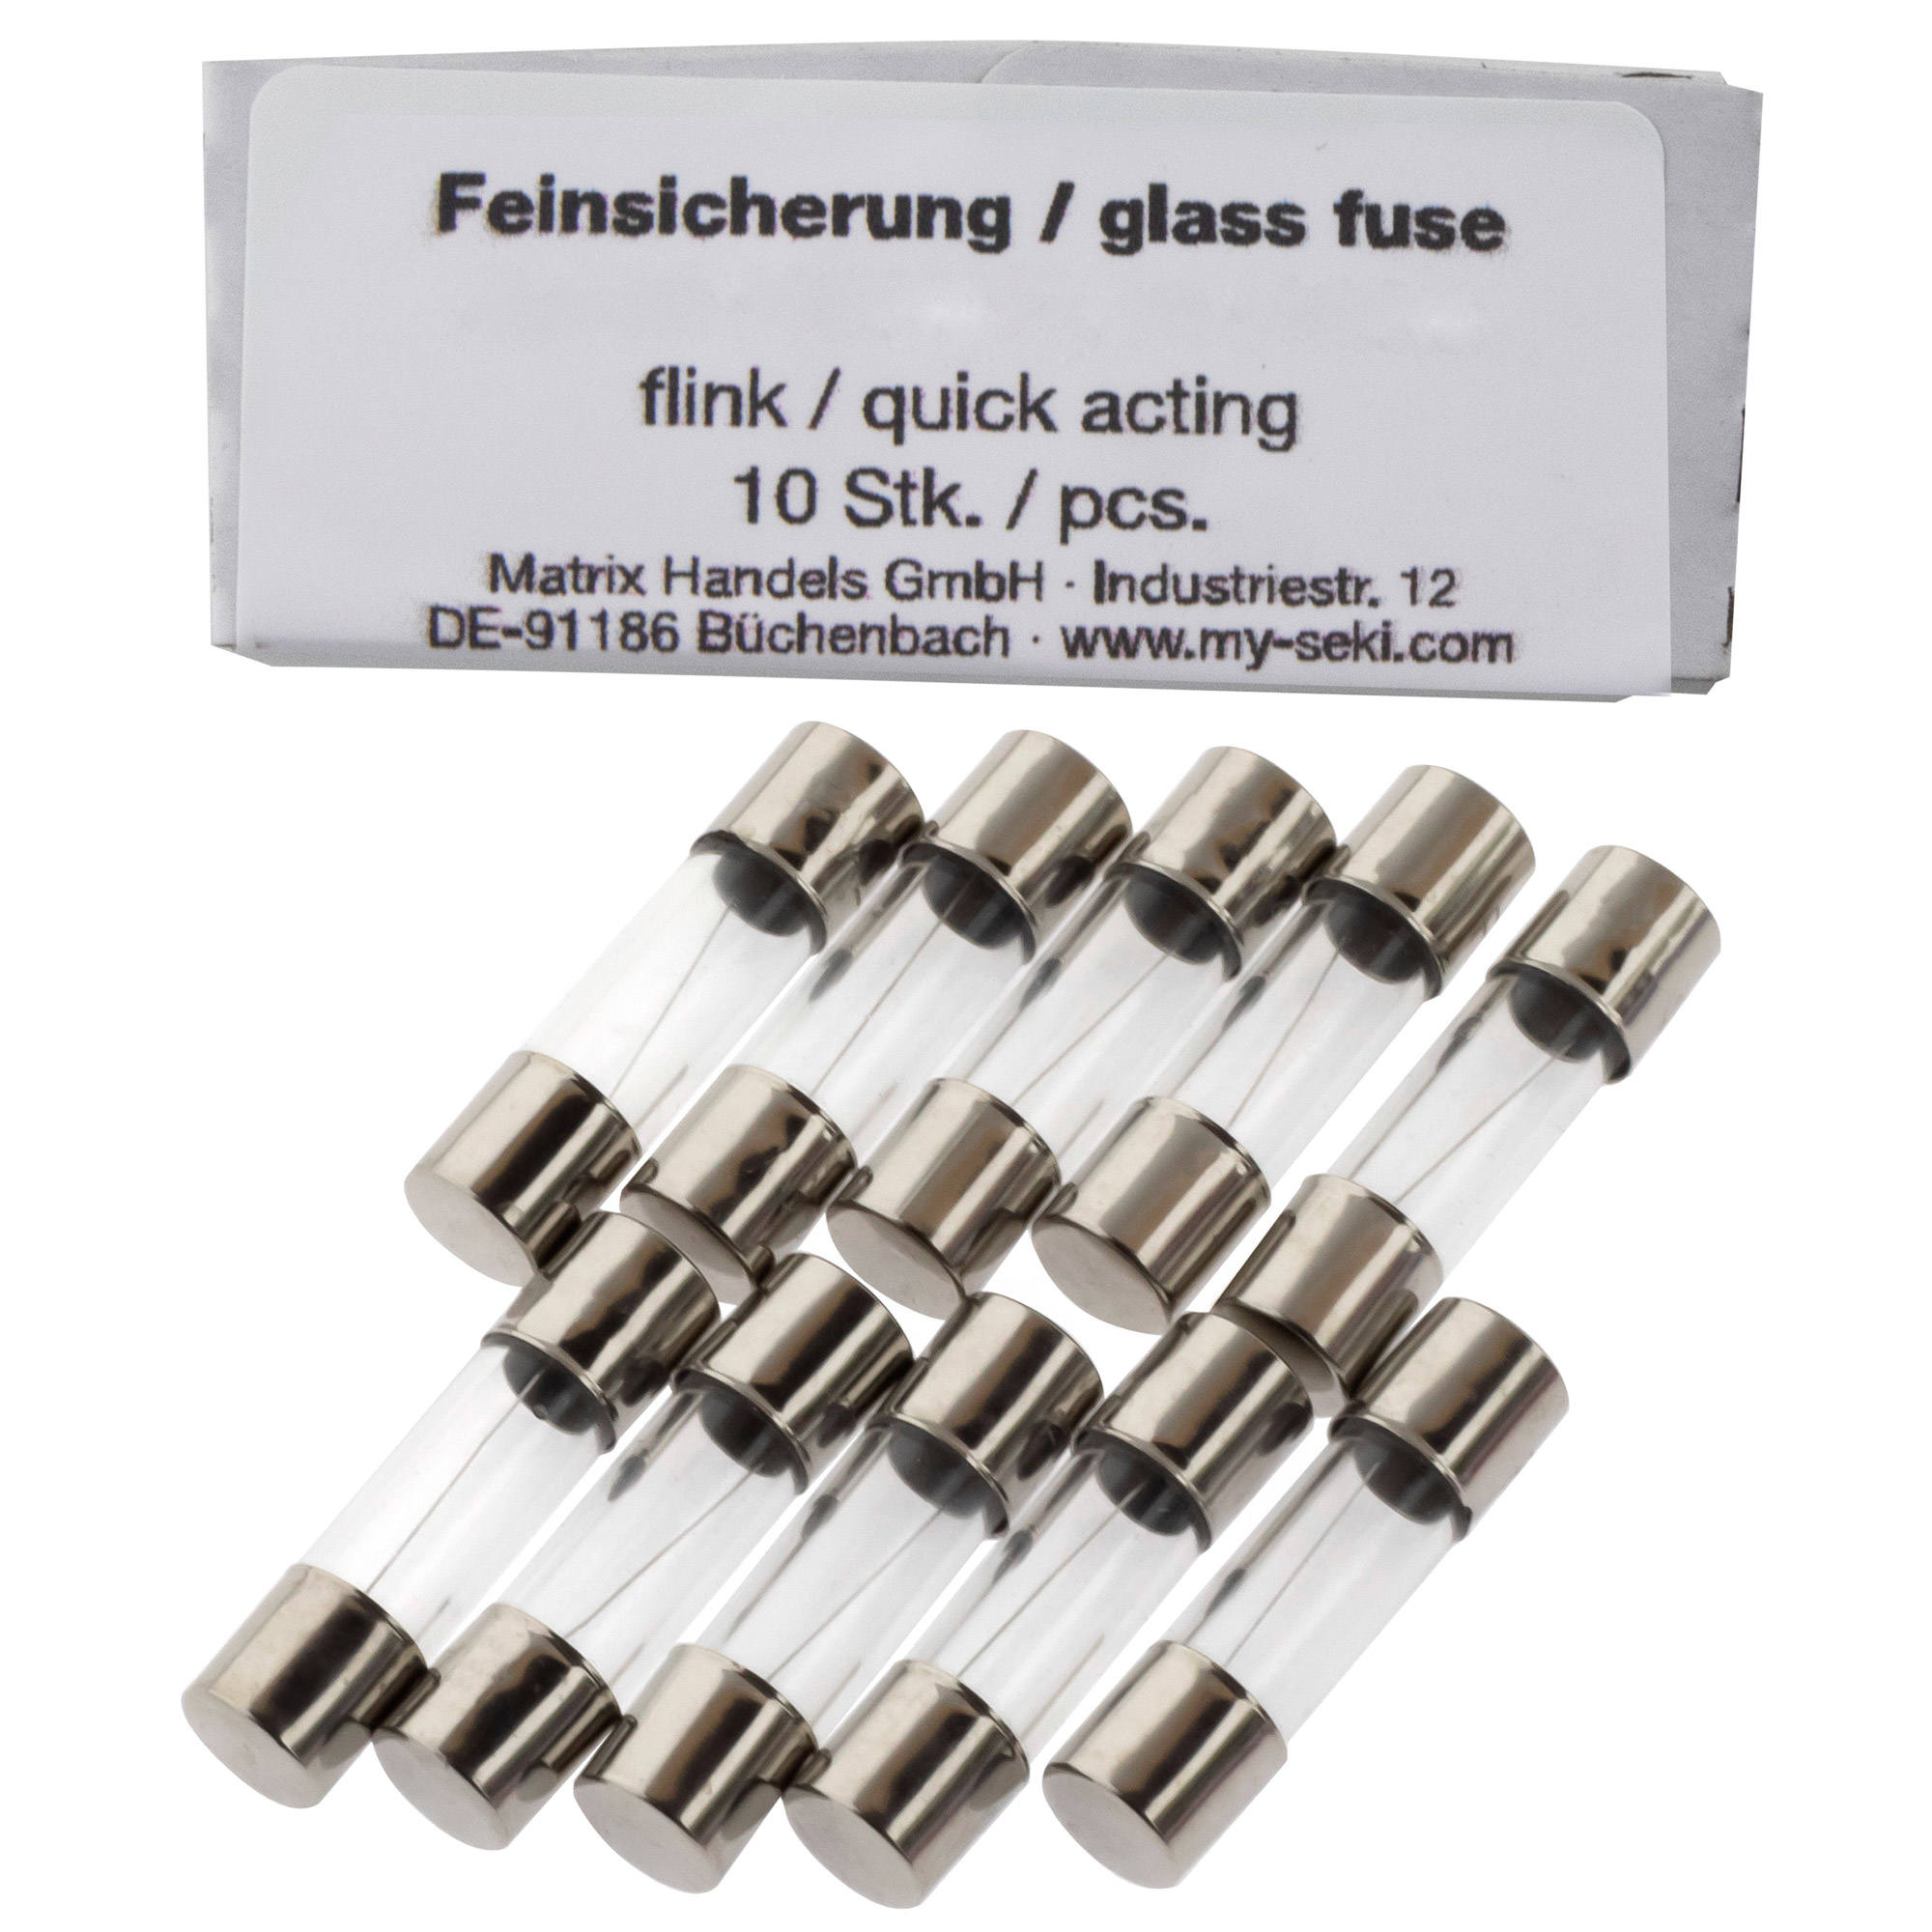 Micro Fuse 0,63A (630mA), 5x20mm, quick acting